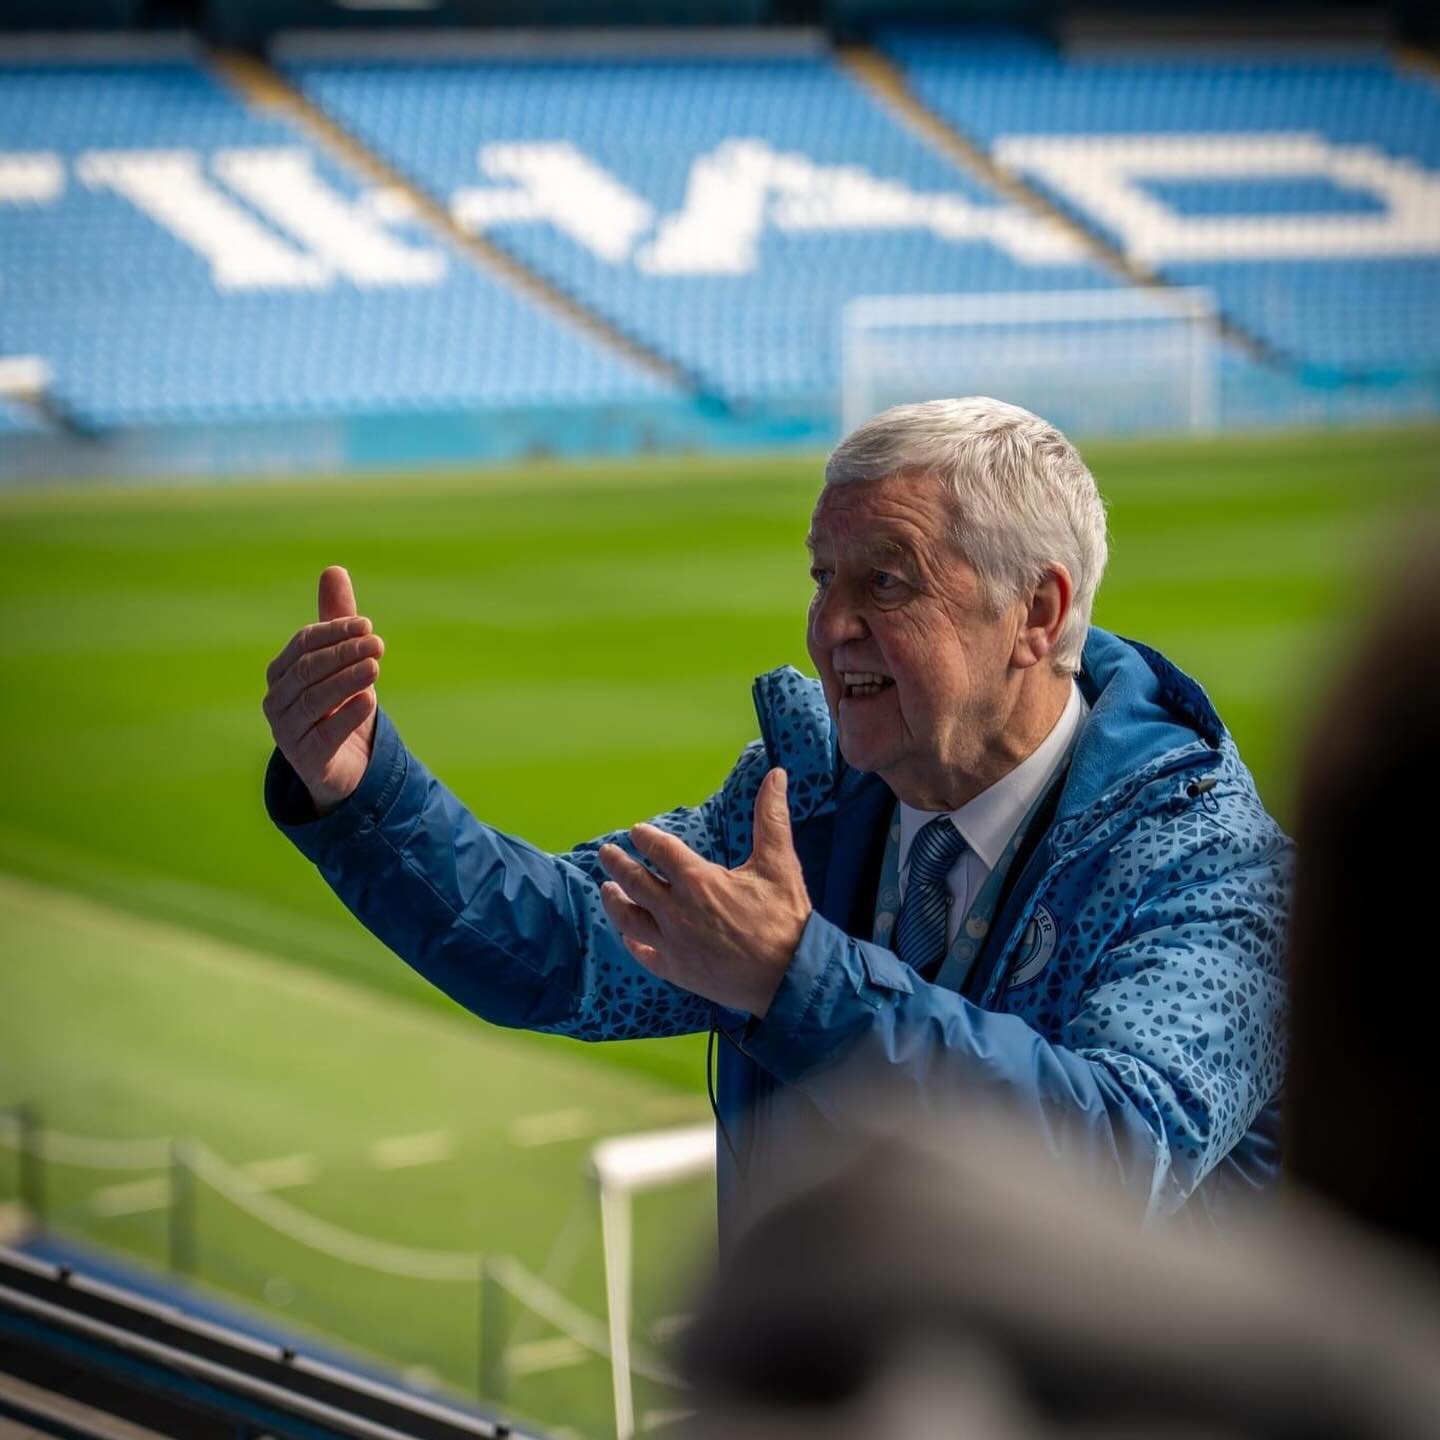 RAY IS THE MAN - a great @mancity tour from Ray and Stan this week with @calebgios Although I really did think it was Mike Summerbee in disguise - 

Great to see the City Set up and the academy areas.

@tomflathers_mcfc what do you think of my shots.